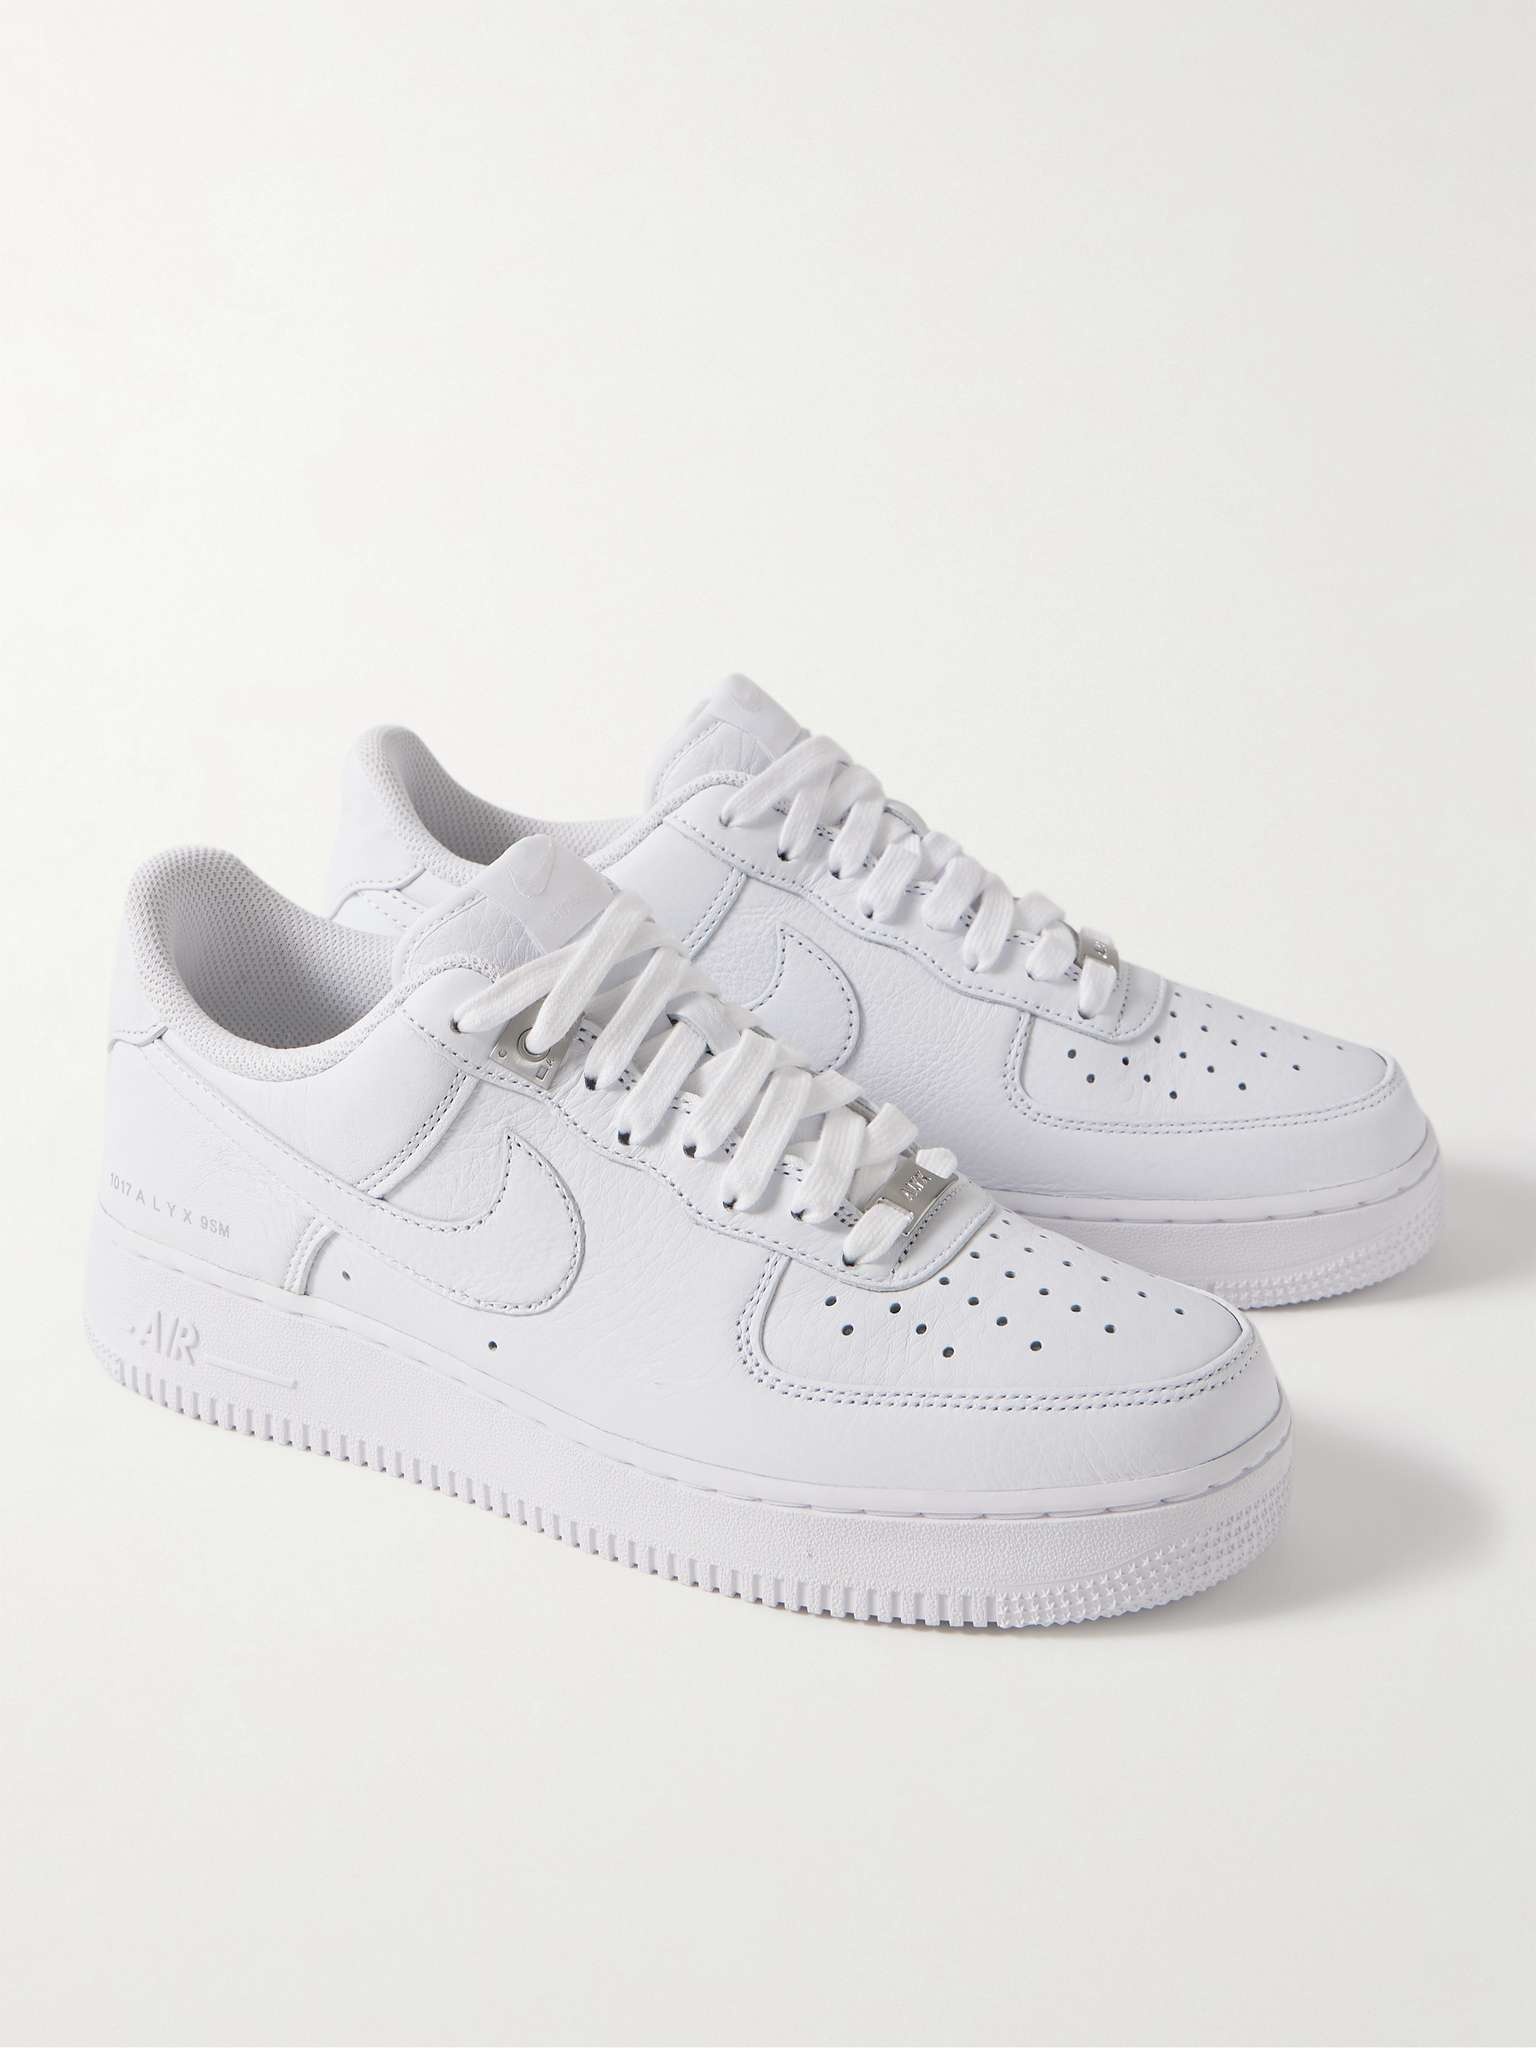 + 1017 ALYX 9SM Air Force 1 SP Leather Sneakers - 4